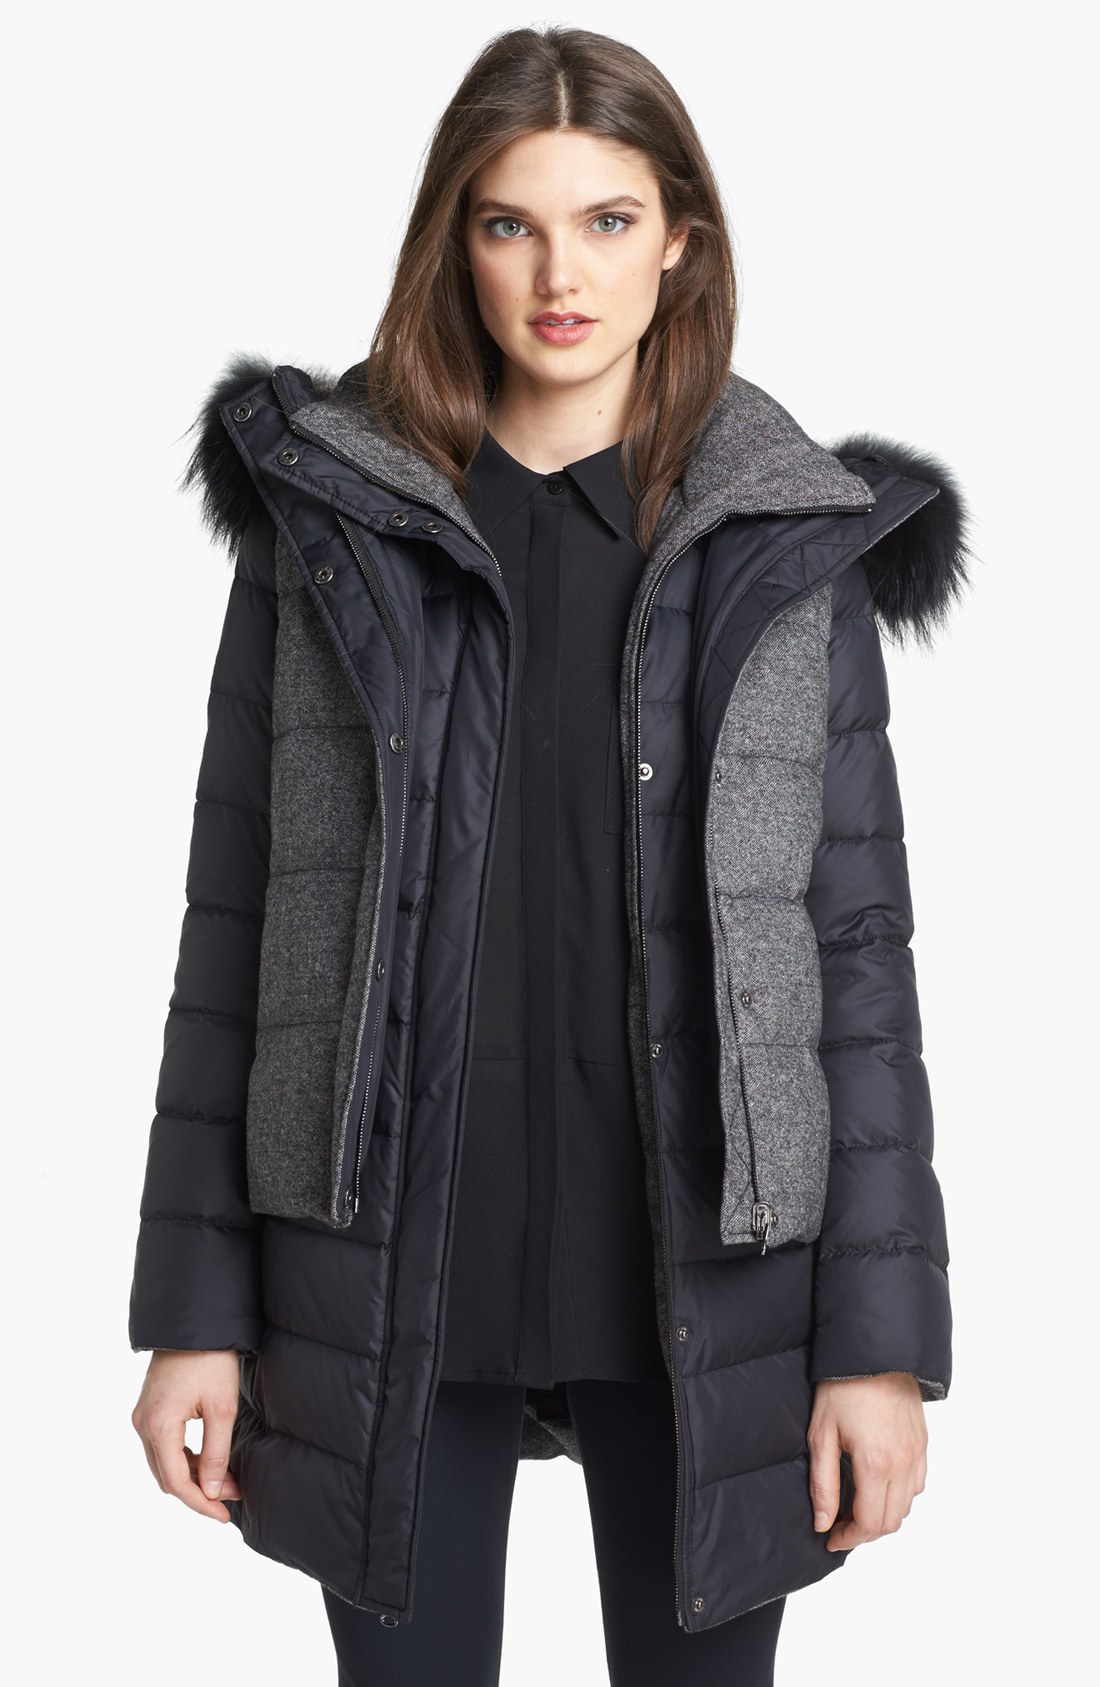 Soia & Kyo 6in1 Reversible Quilted Jacket Vest with Genuine Fox Fur